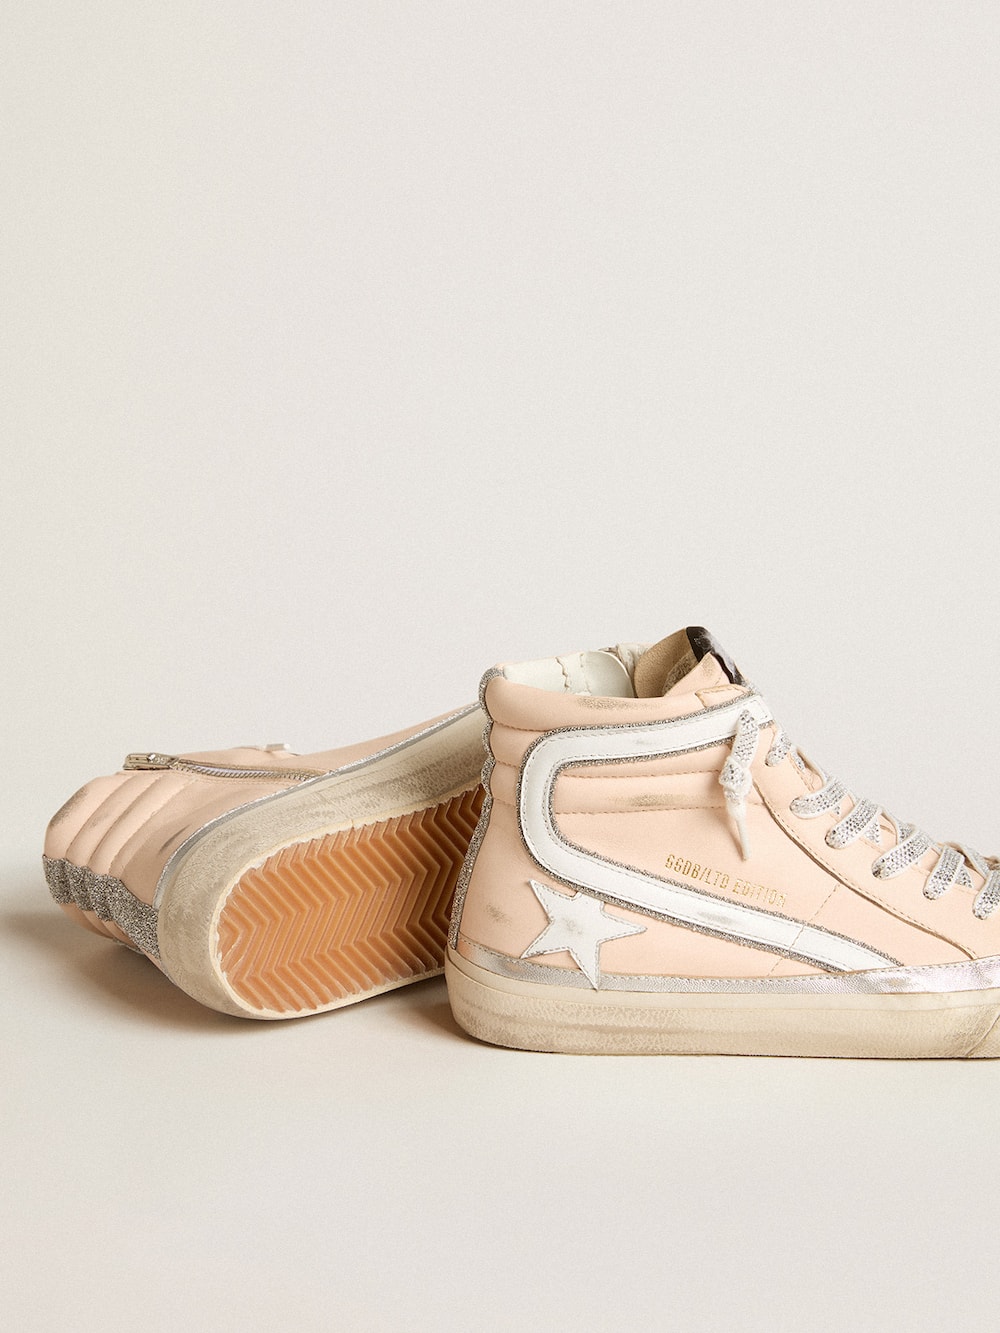 Golden Goose - Slide LTD in pink nappa leather with white star and Swarovski inserts in 